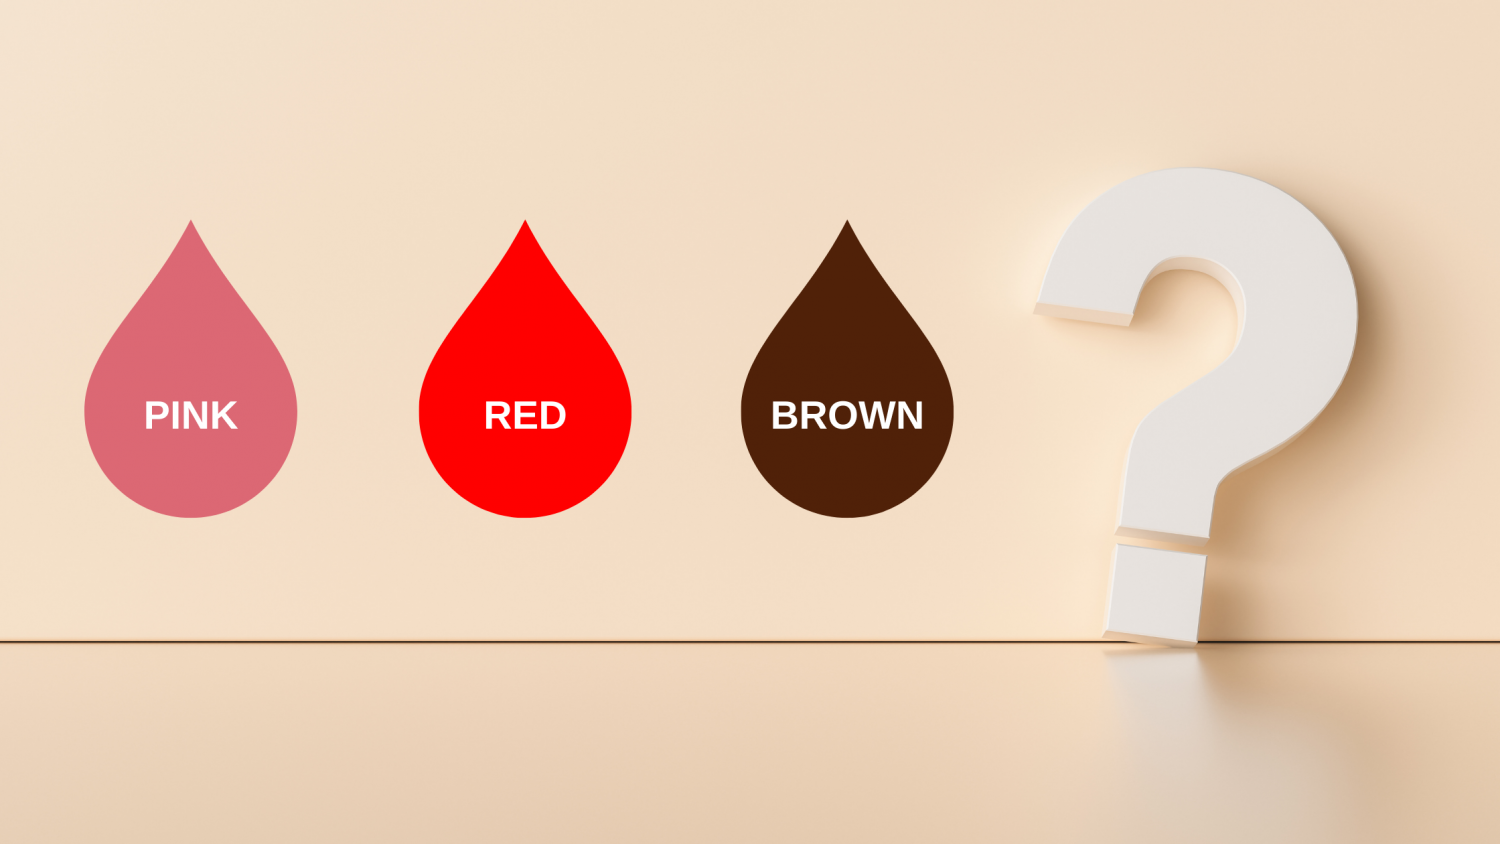 Worried about that brown discharge after your period? Keep calm